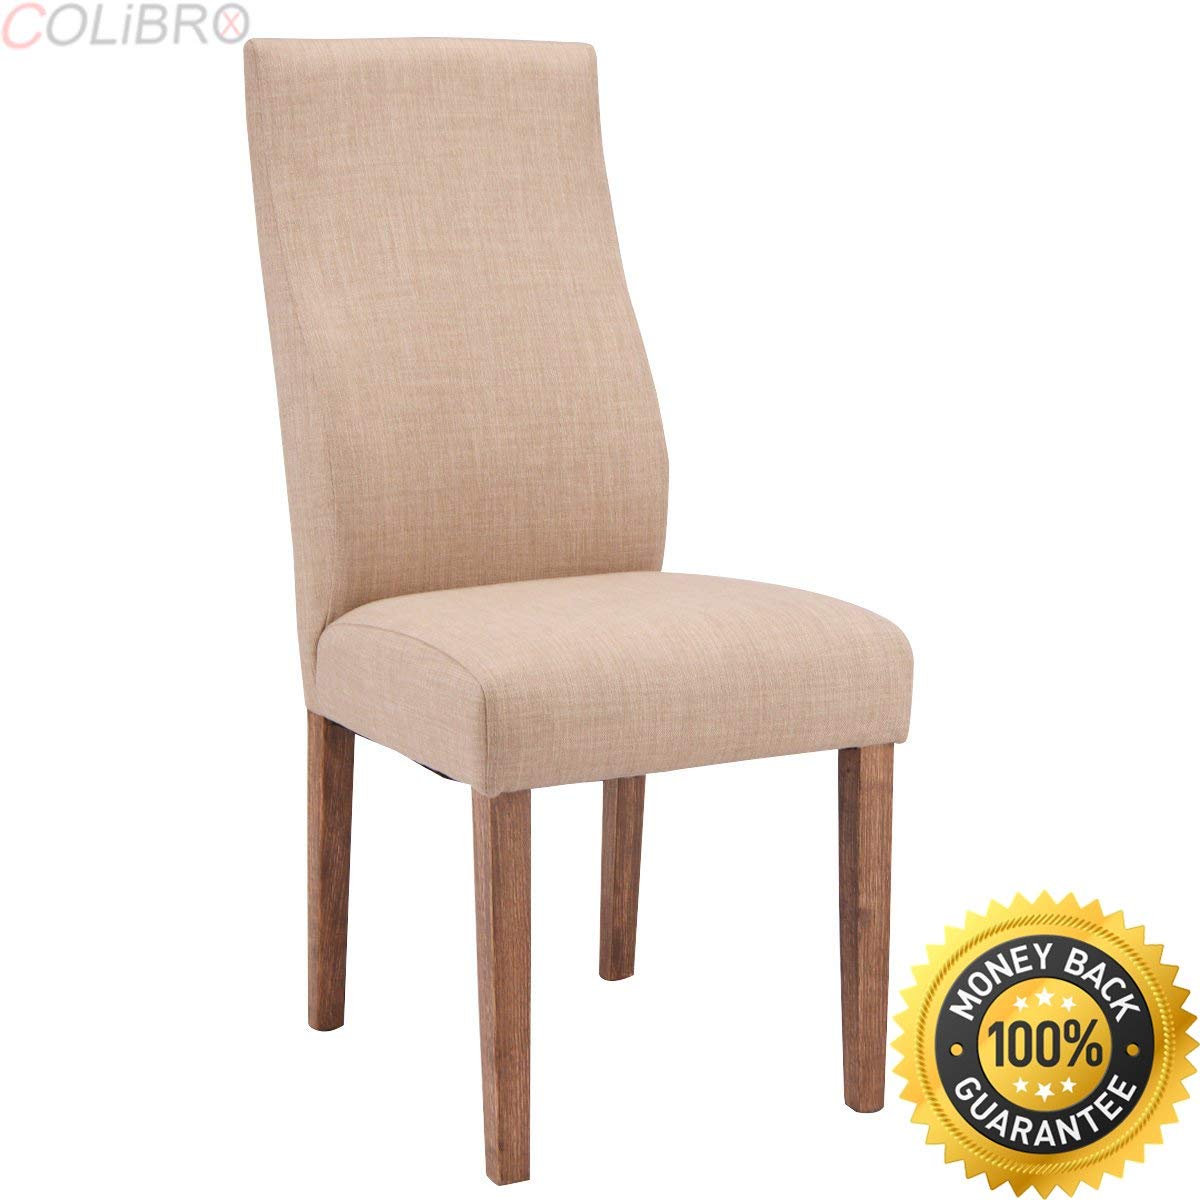 small accent chairs find line for dining room table get quotations colibrox set fabric upholstered armless home furniture new wrought iron lamps mat inch square tablecloth round